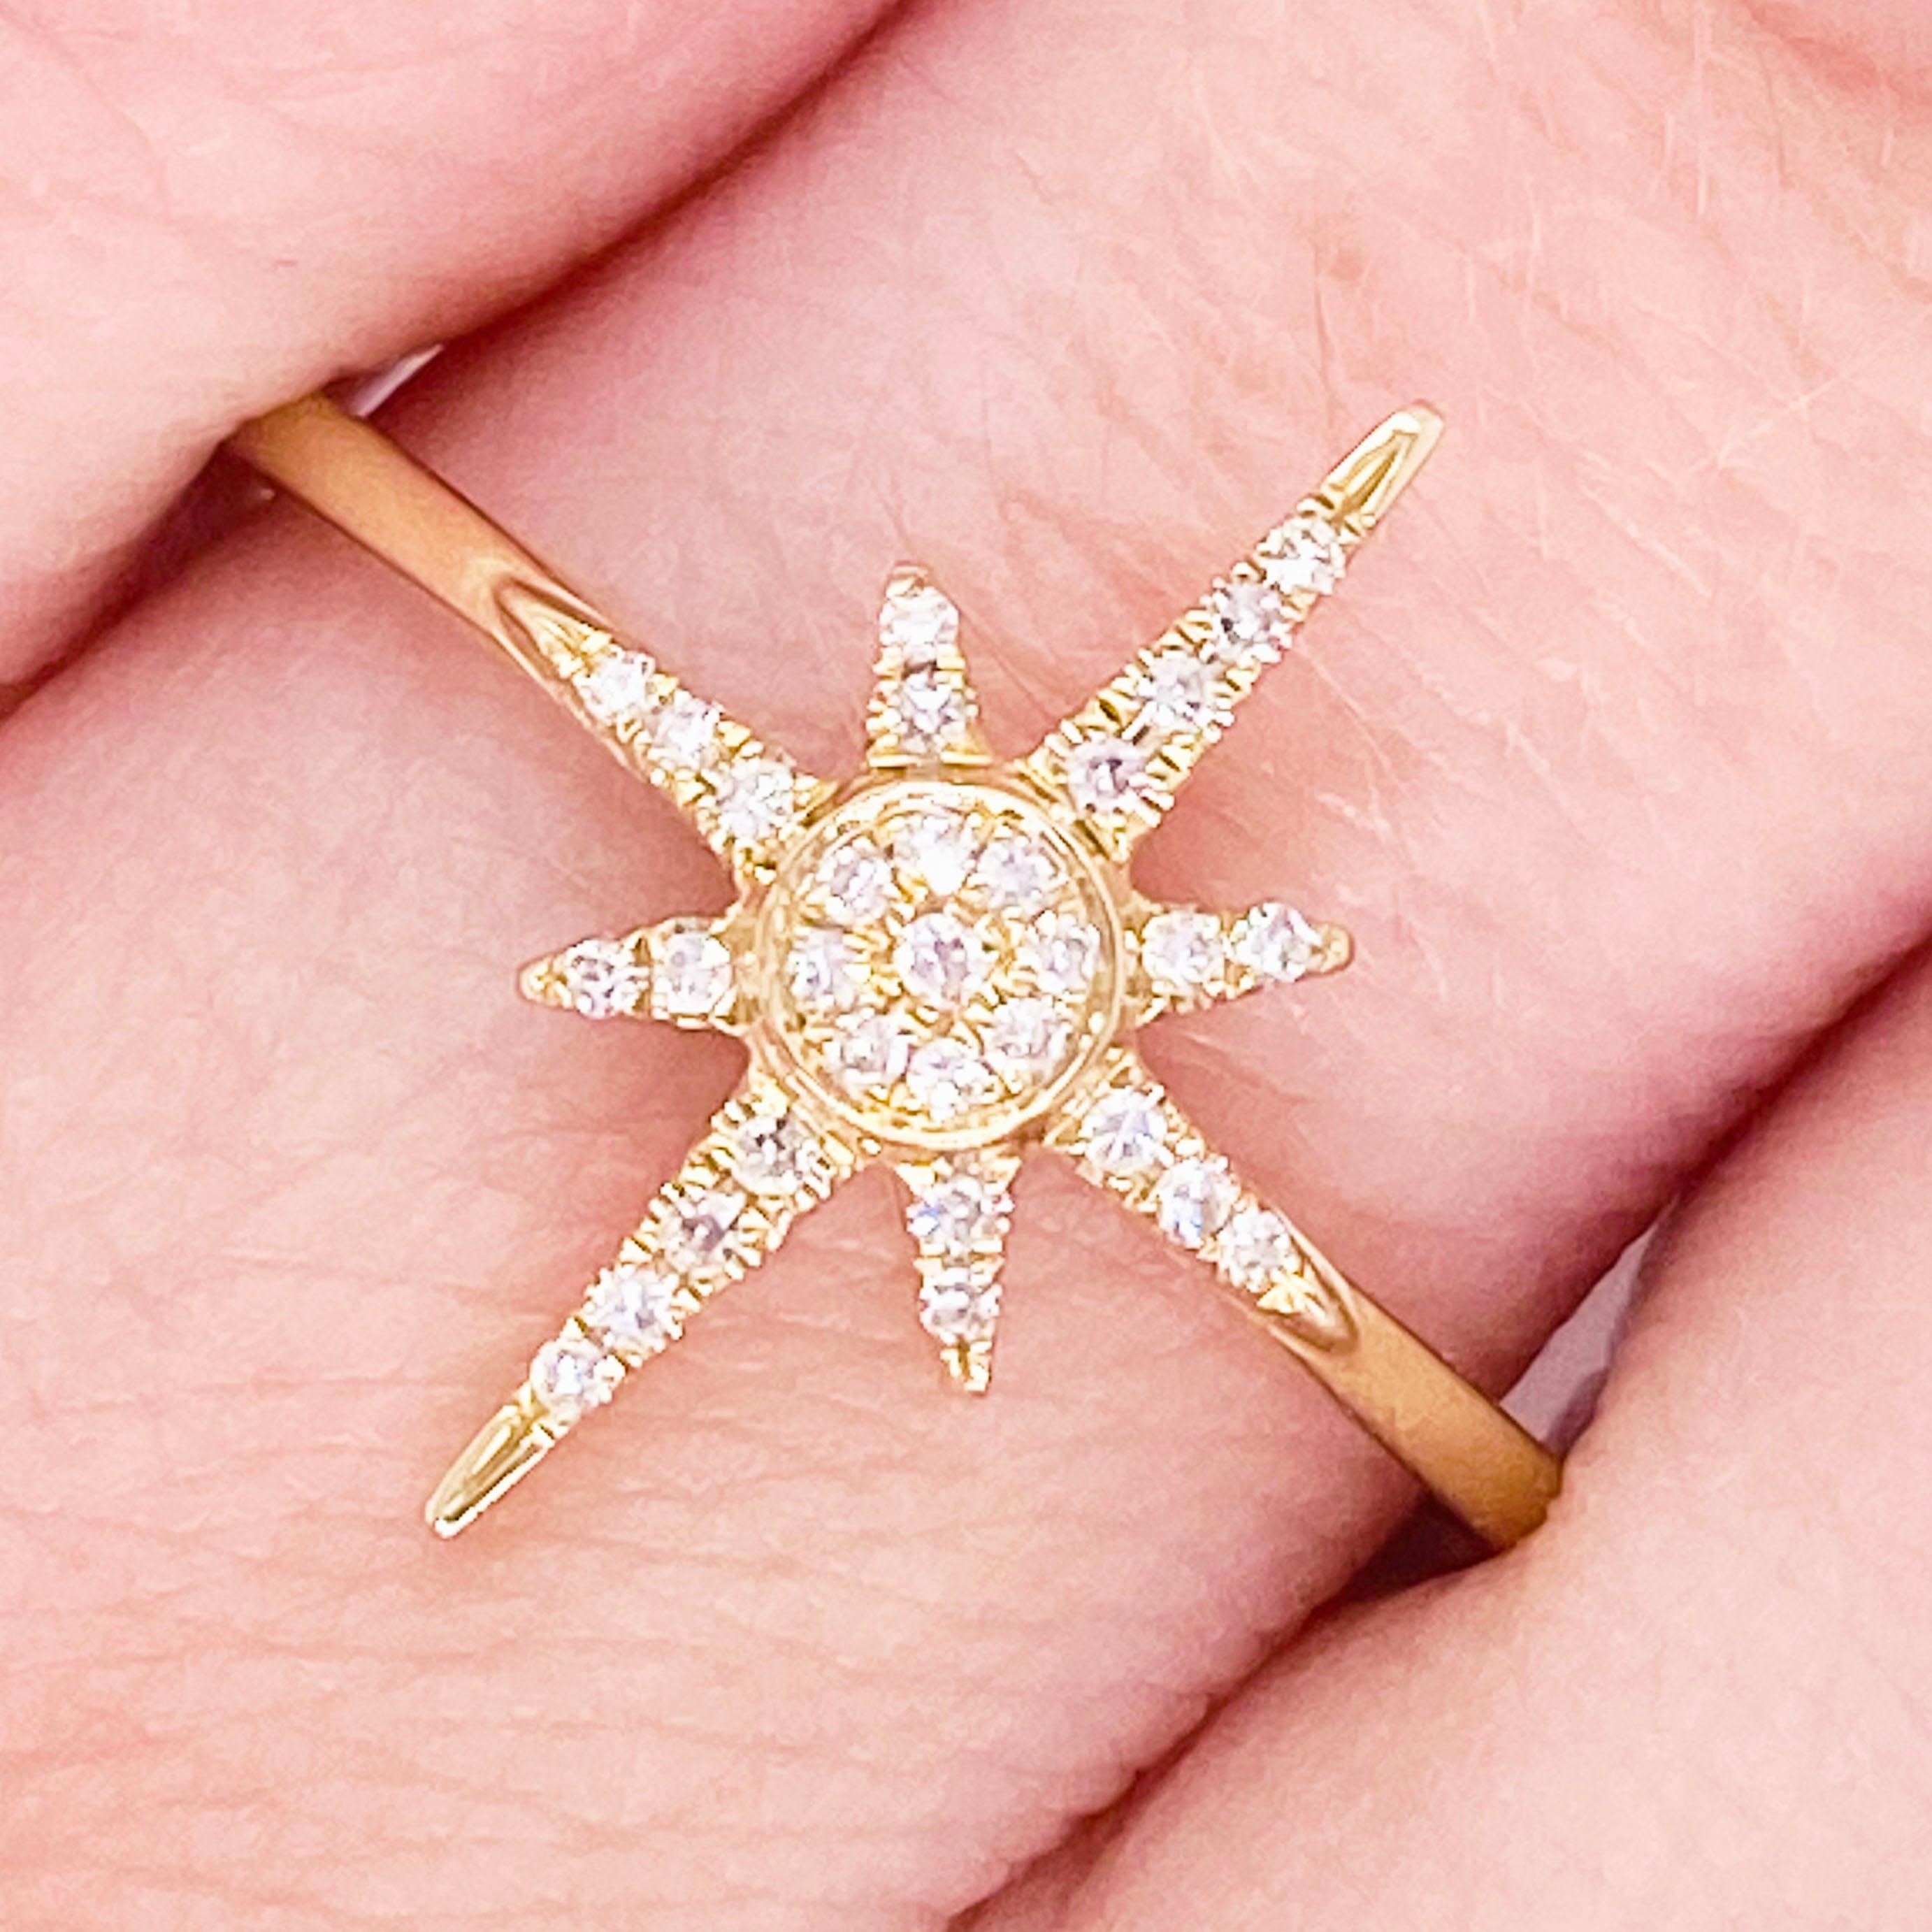 This lovely diamond ring has a beautiful north star design! Accented by lovely 14 karat yellow gold, this ring is amazing by itself or in a stack! Treat yourself or your loved one today!

The details for this beautiful ring are listed below:
Metal